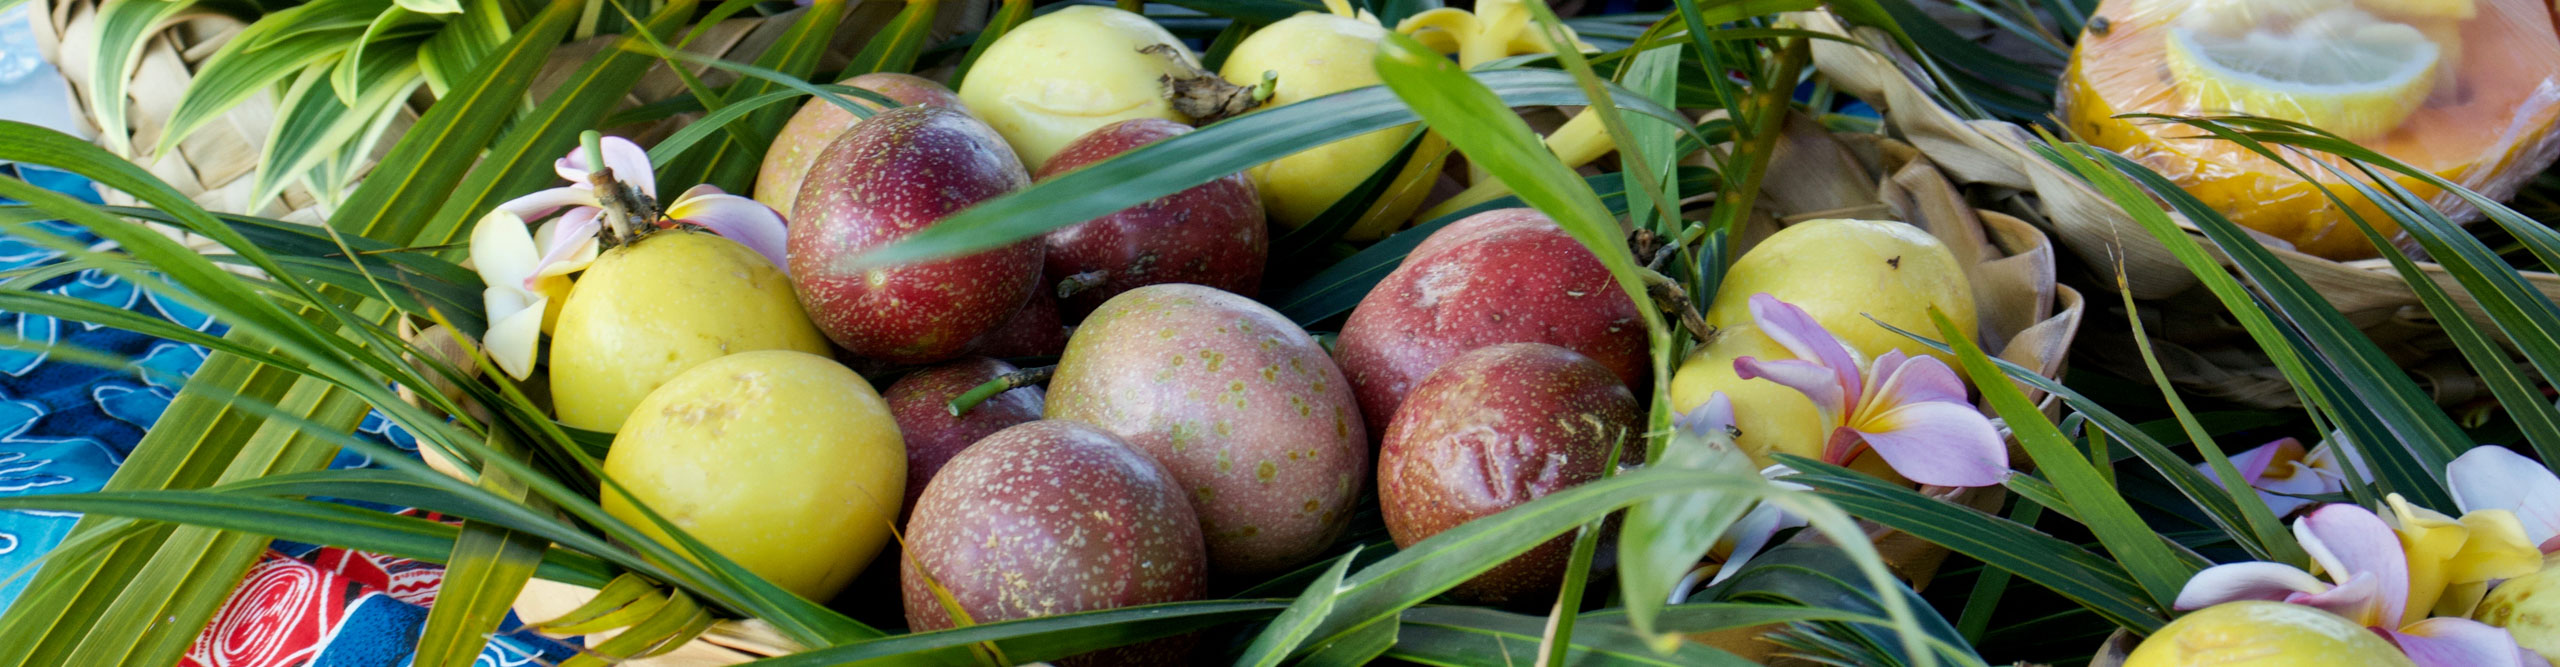 The tropical fruit on the Isle of Pines in New Caledonia.